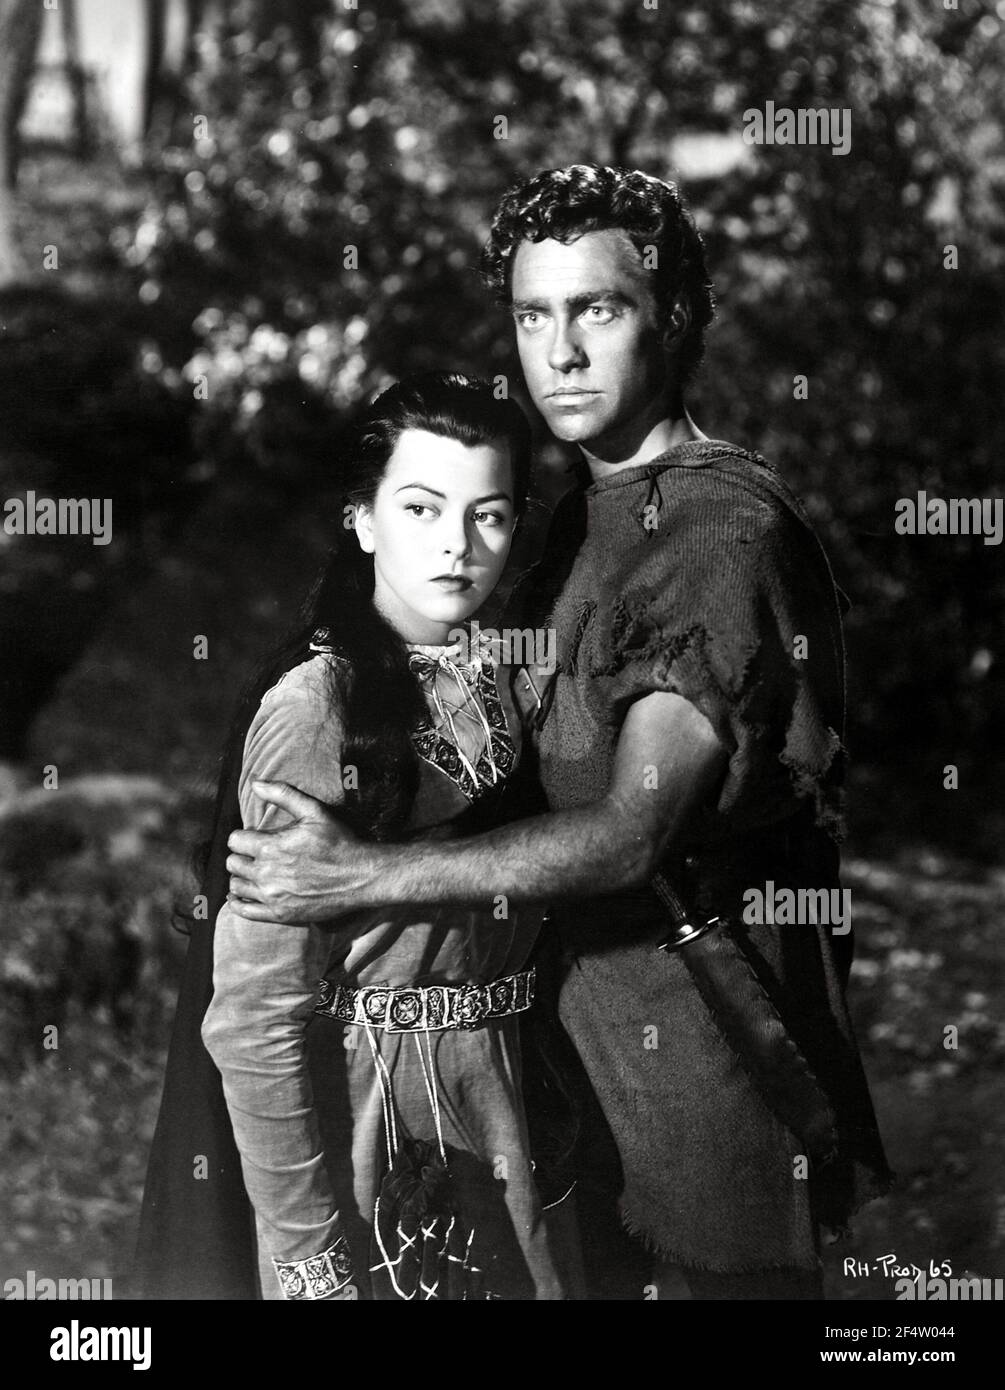 RICHARD TODD and JOAN RICE in THE STORY OF ROBIN HOOD AND HIS MERRIE MEN (1952), directed by KEN ANNAKIN. Credit: WALT DISNEY PRODUCTIONS / Album Stock Photo